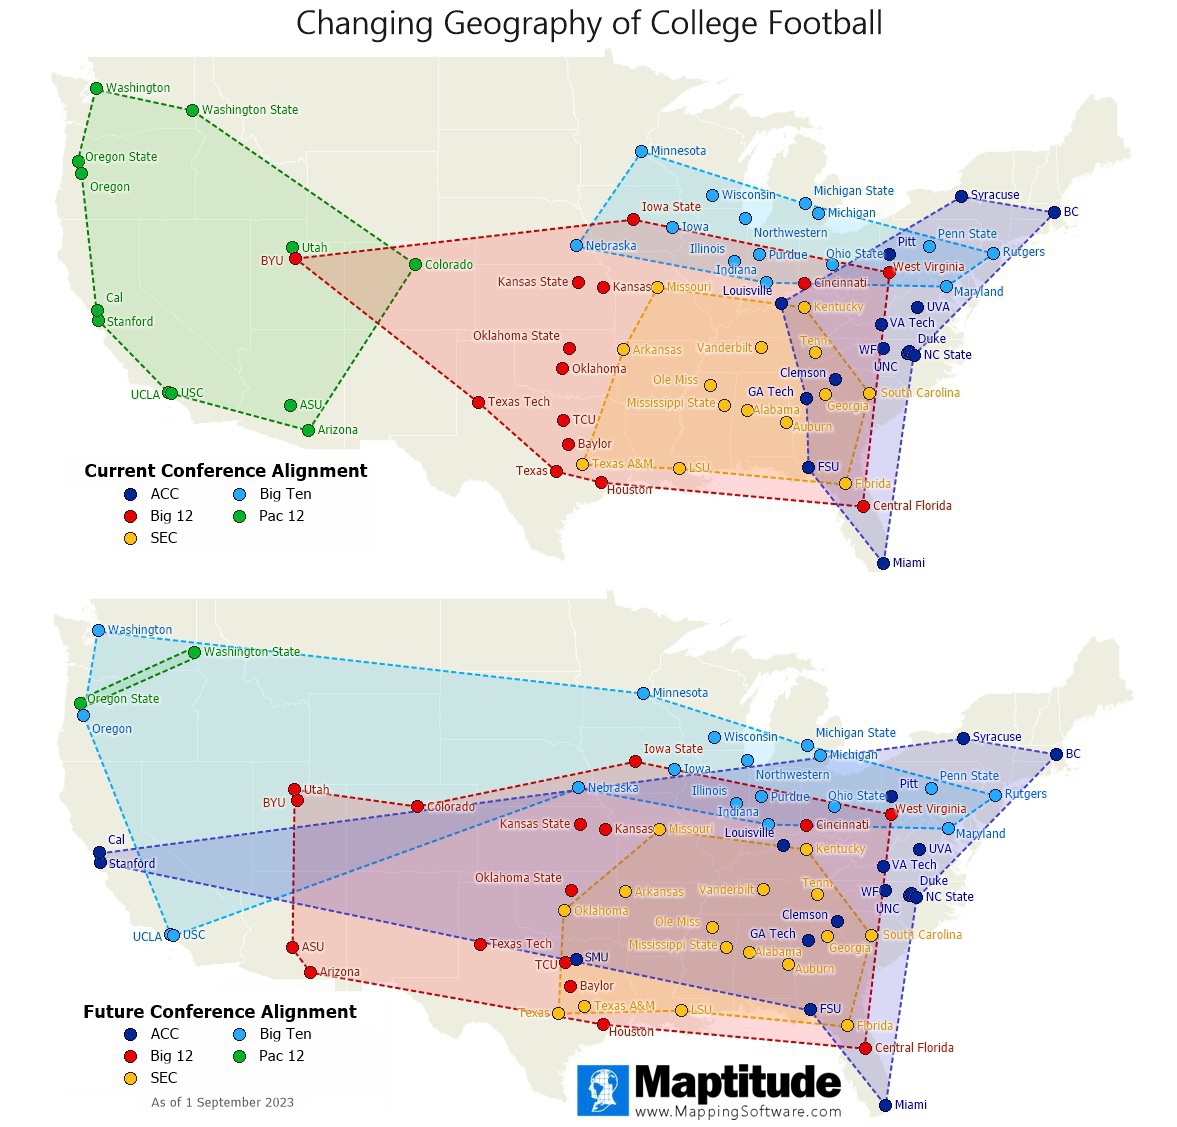 Maptitude mapping software infographic comparing the current and future geographic distribution of college football conferences